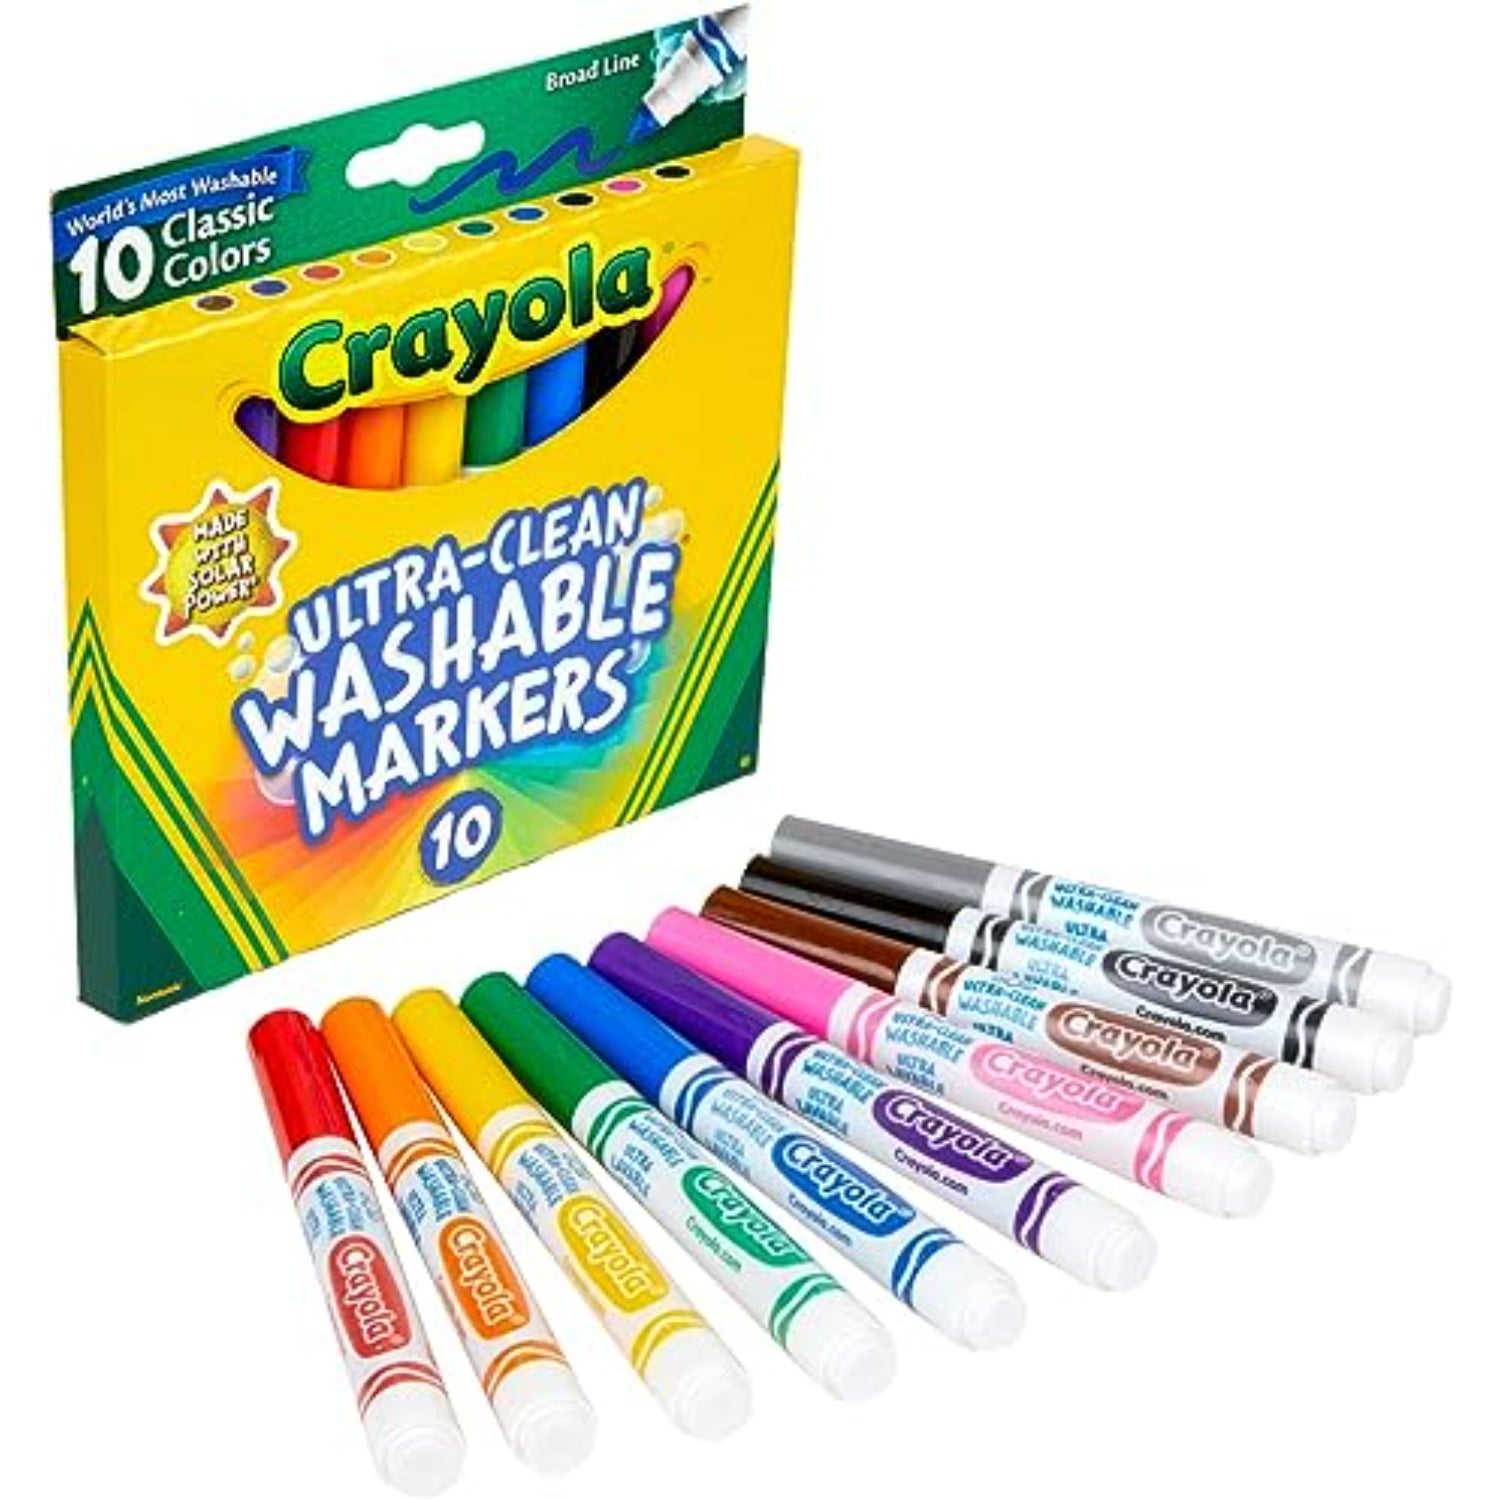 Crayola Washable Markers, Broad Line, Assorted Classic Colors, Box of